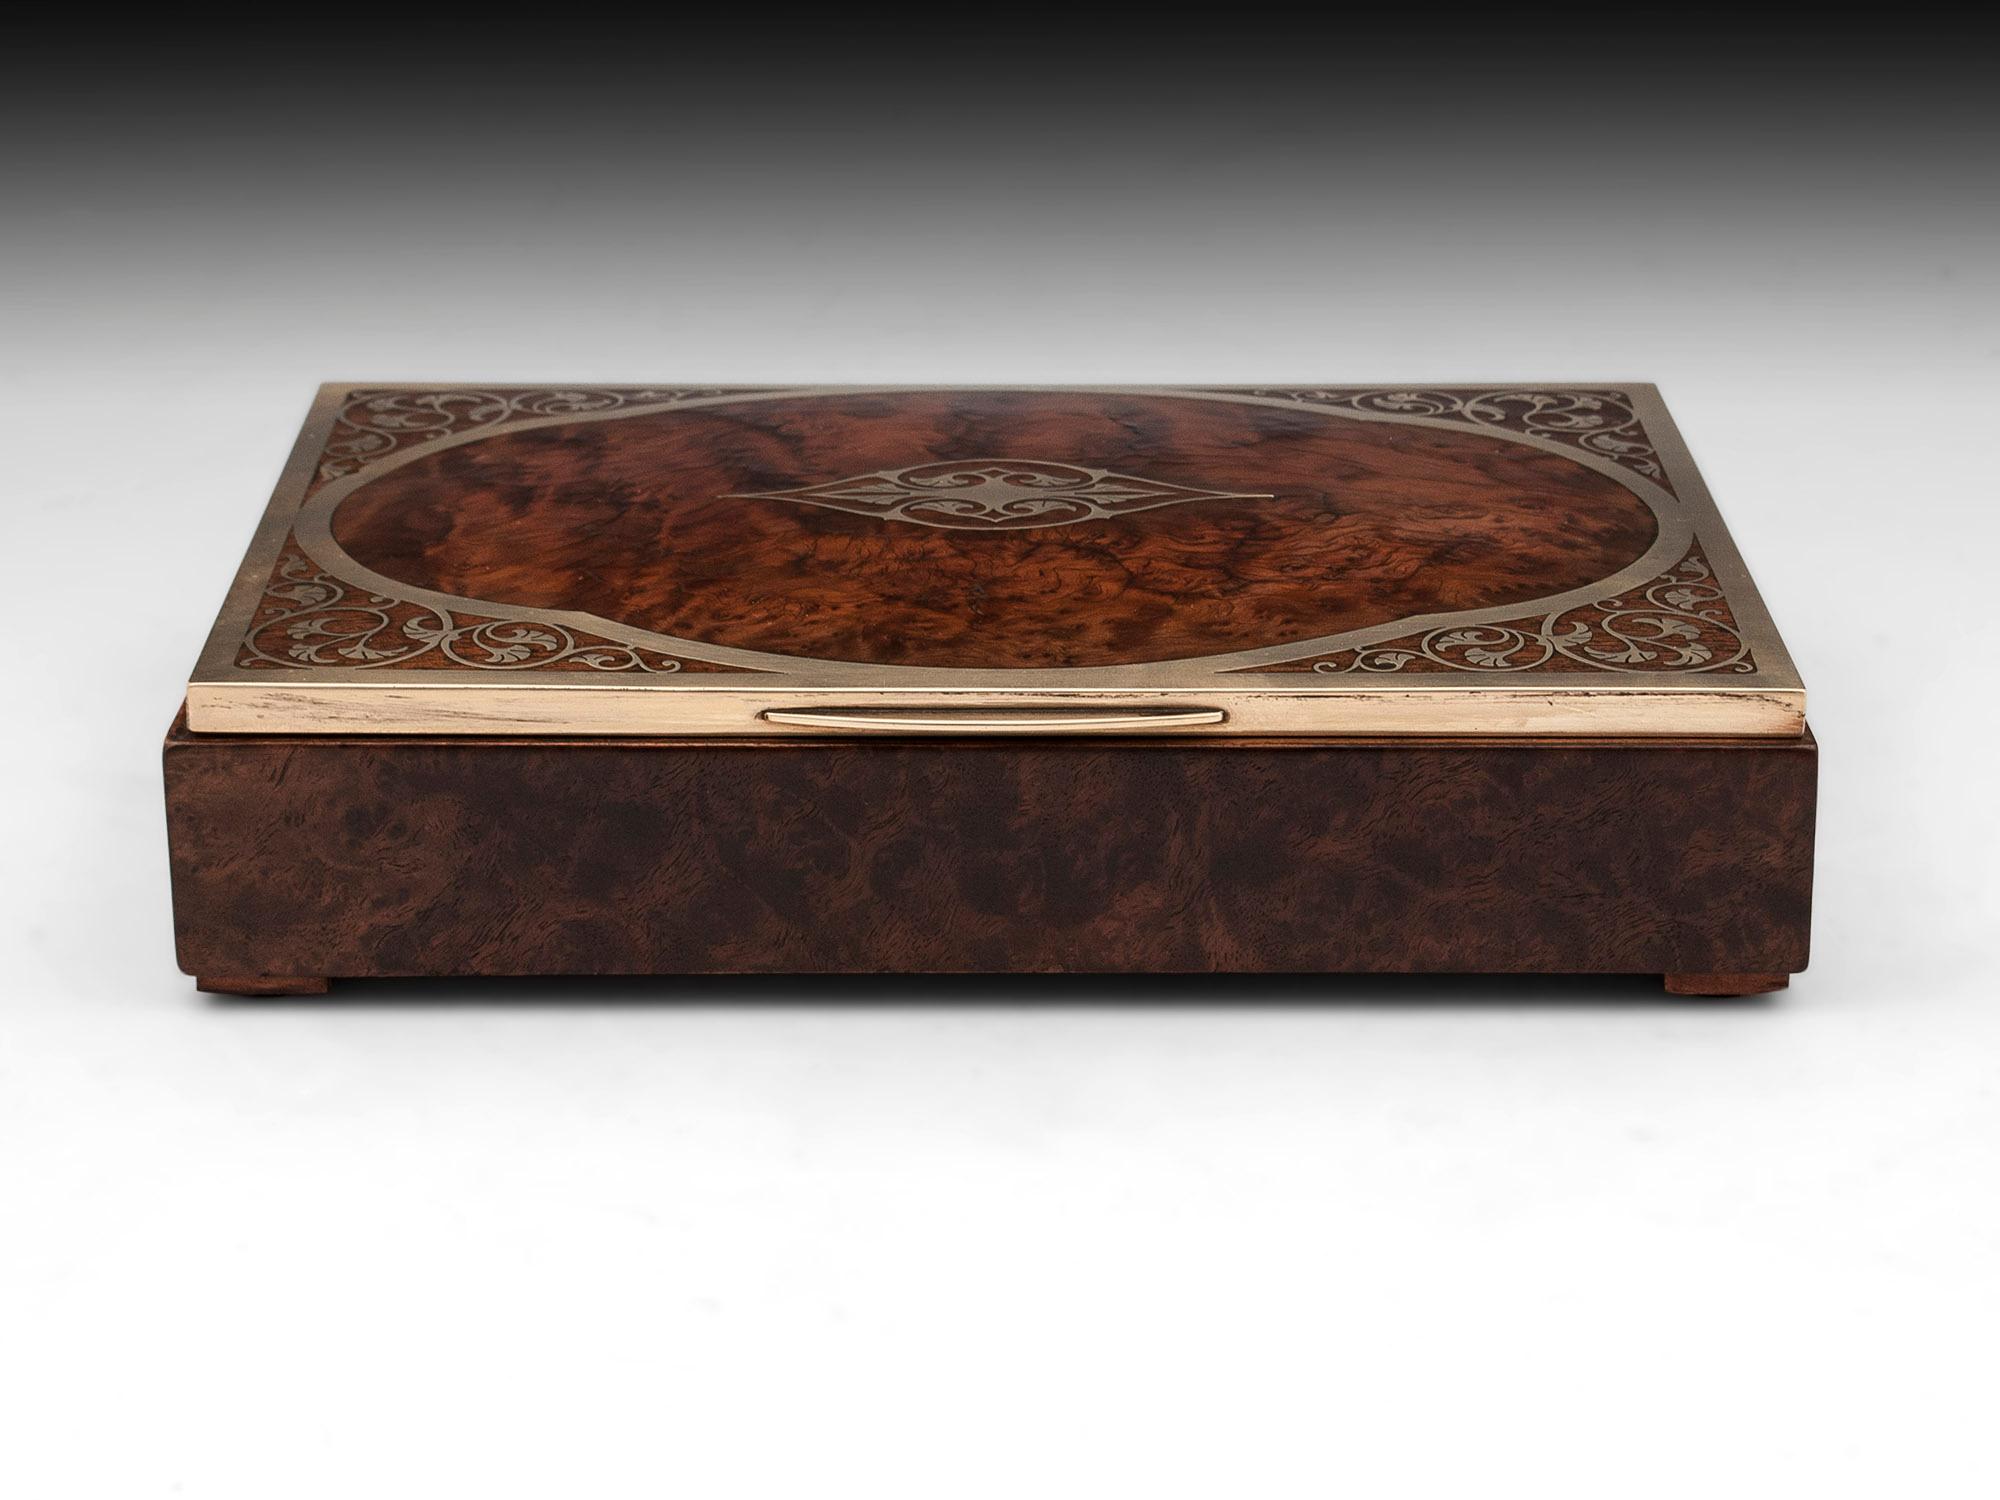 Burr Yew jewelry box with bold brass edging and inlay.
The interior is lined with white silk and luxurious teal padded velvet to help keep protect your precious items.
    